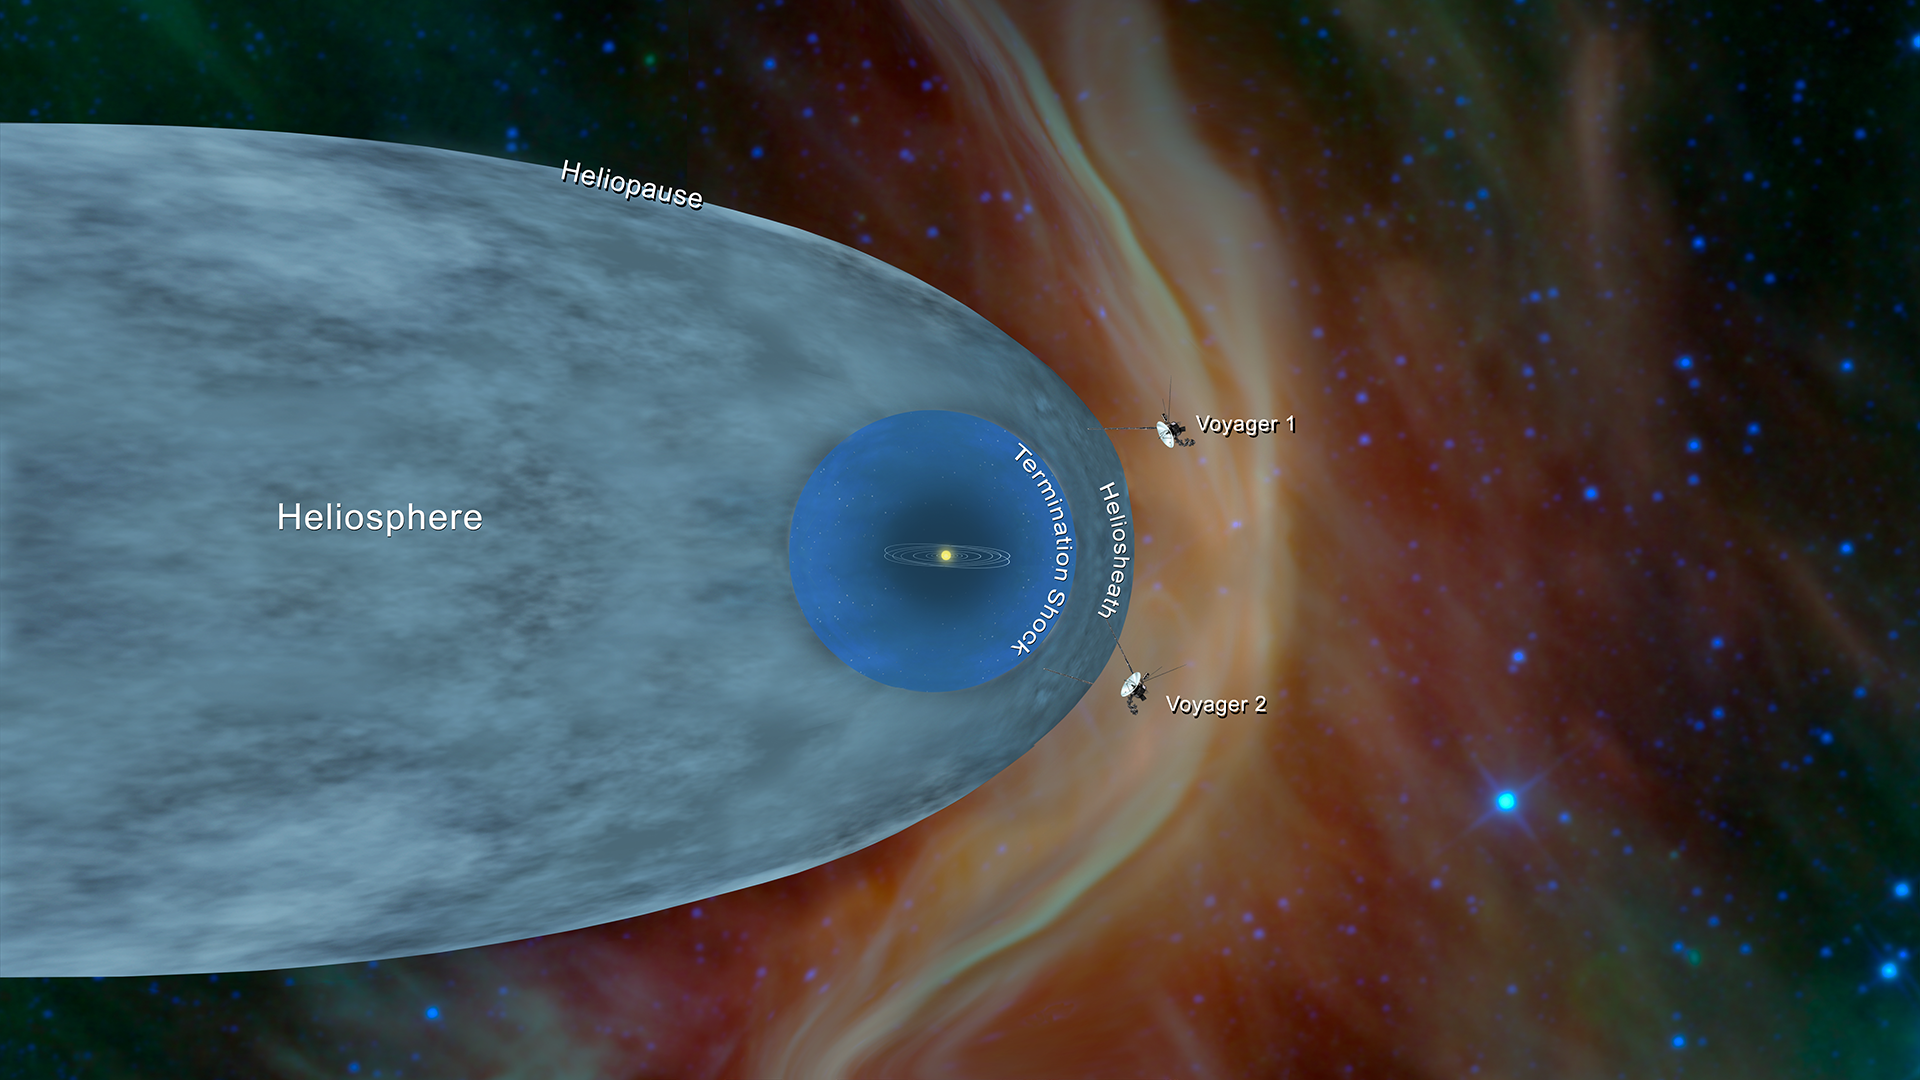 Voyager 1 and 2 position The Strange Happenings On The Edge Of Interstellar Space